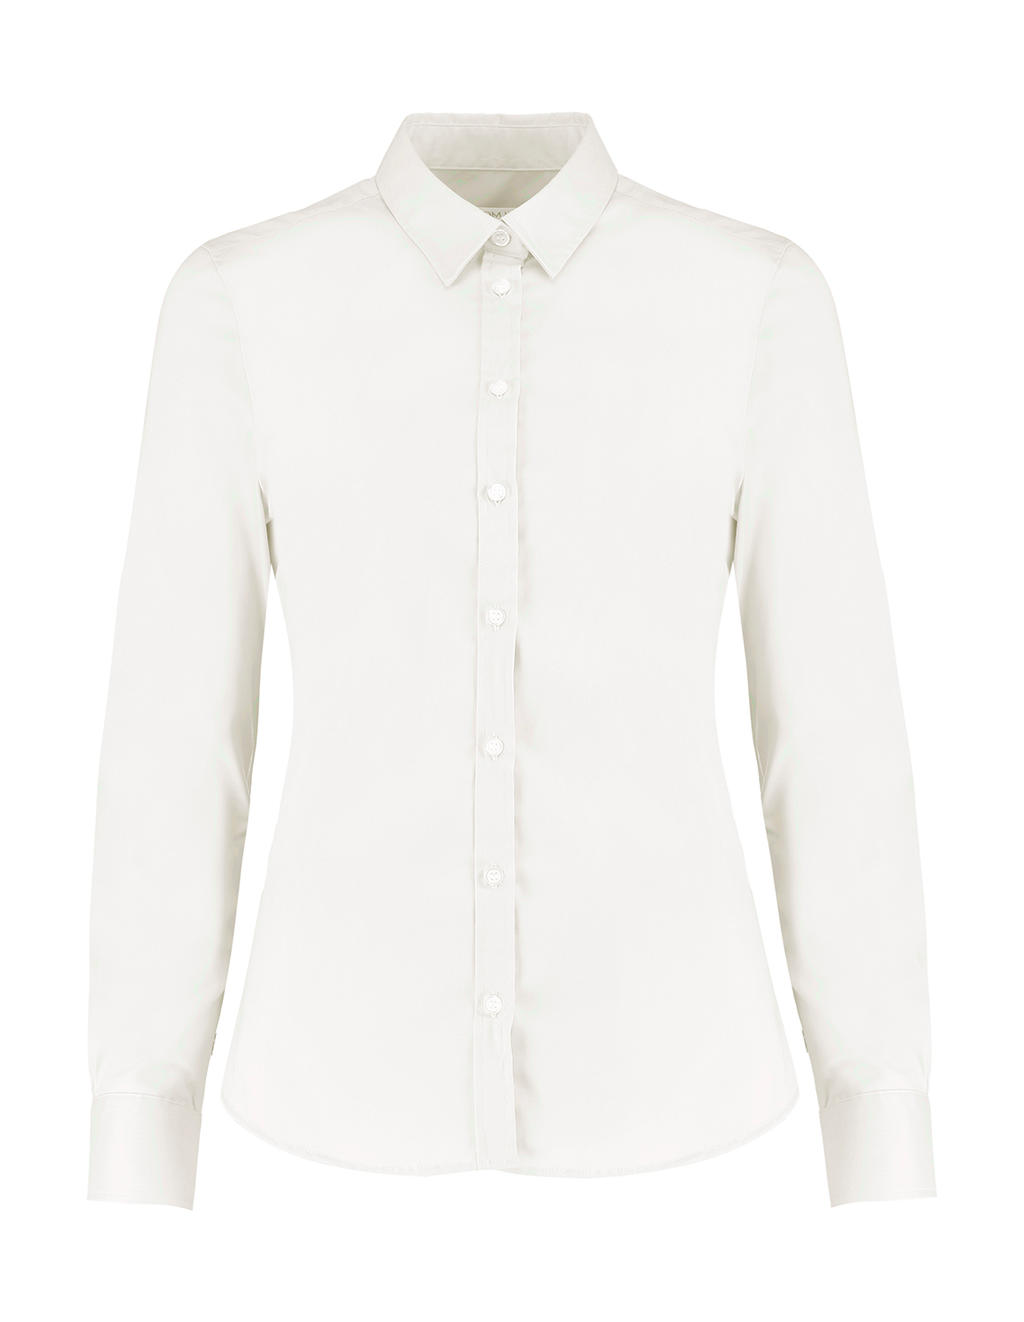 Women's Tailored Fit Stretch Oxford Shirt LS